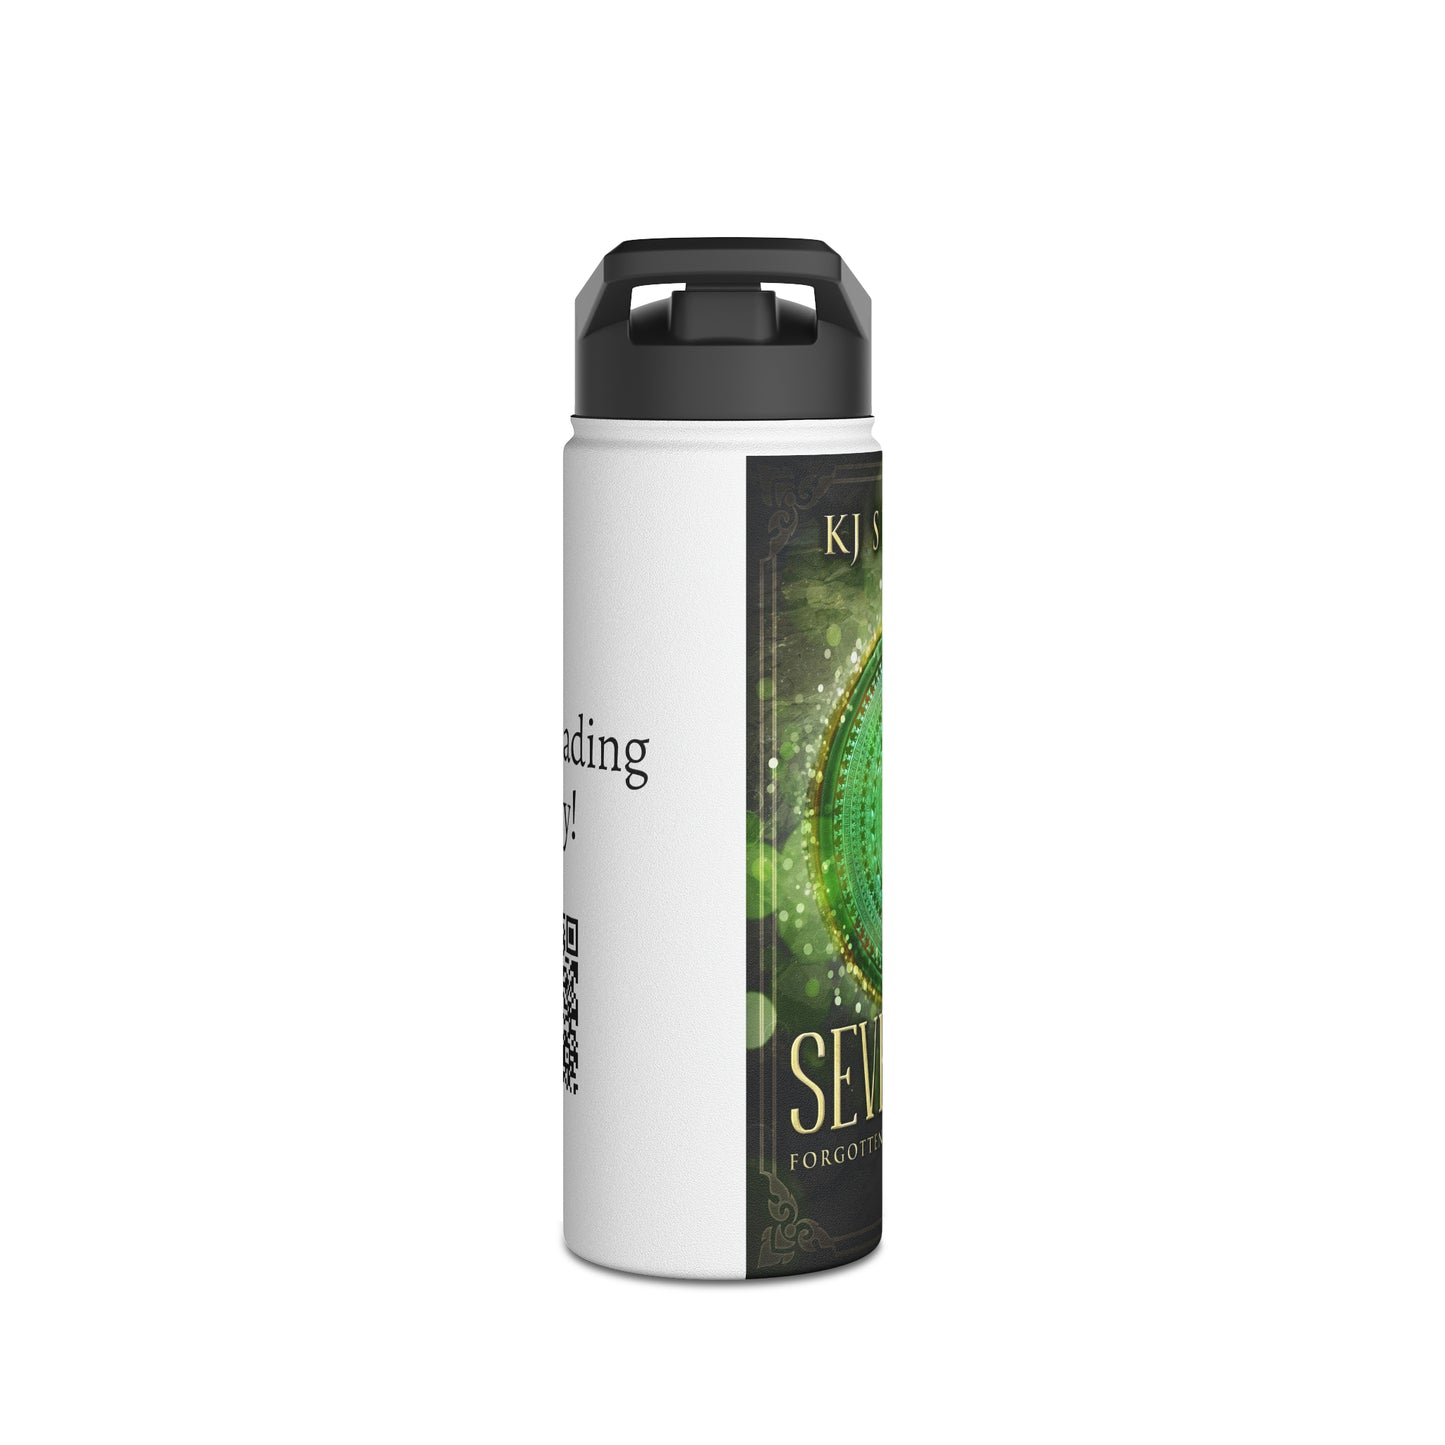 The Severaine - Stainless Steel Water Bottle